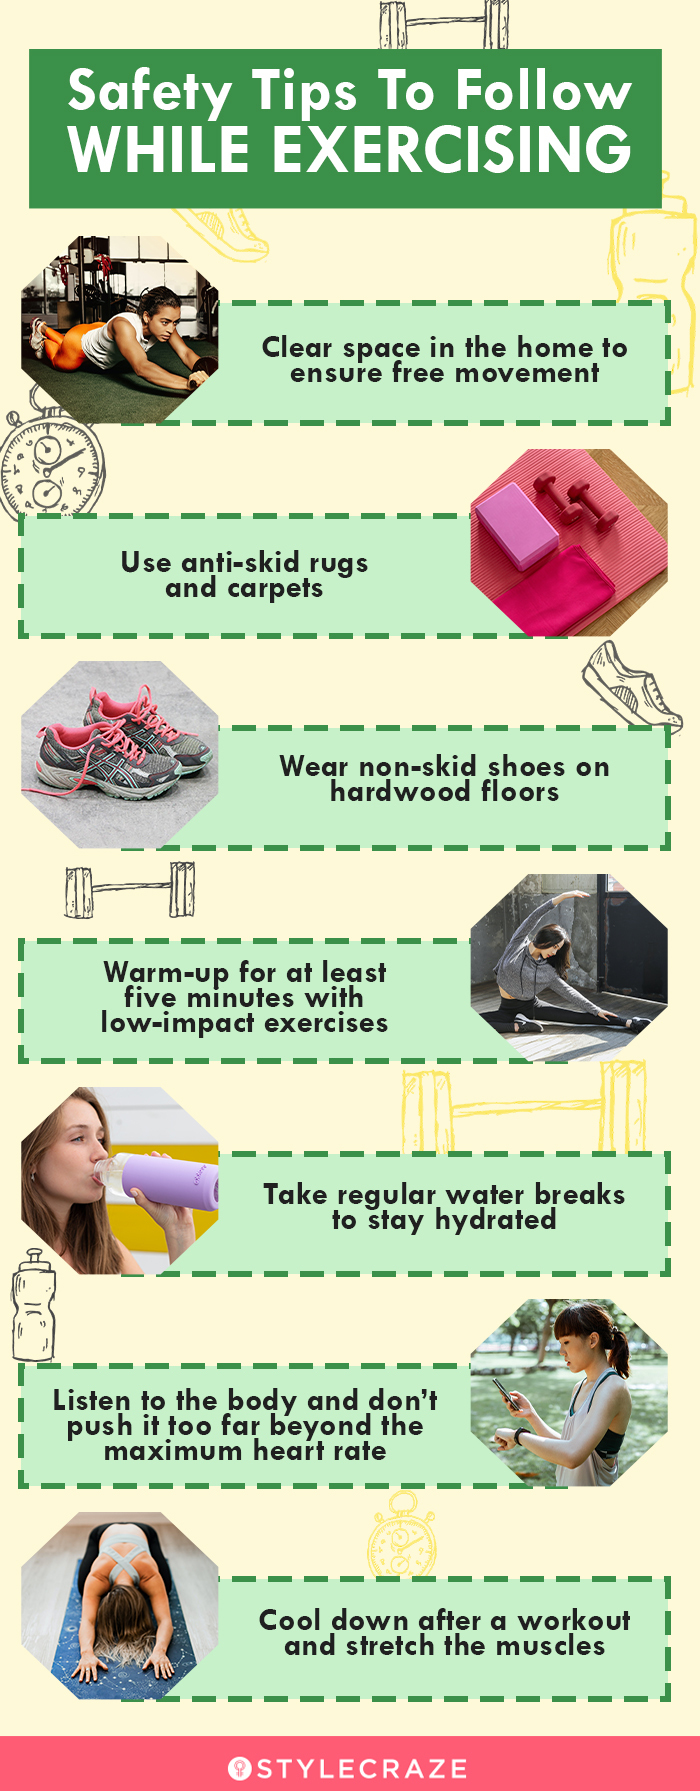 safety tips during exercise [infographic]